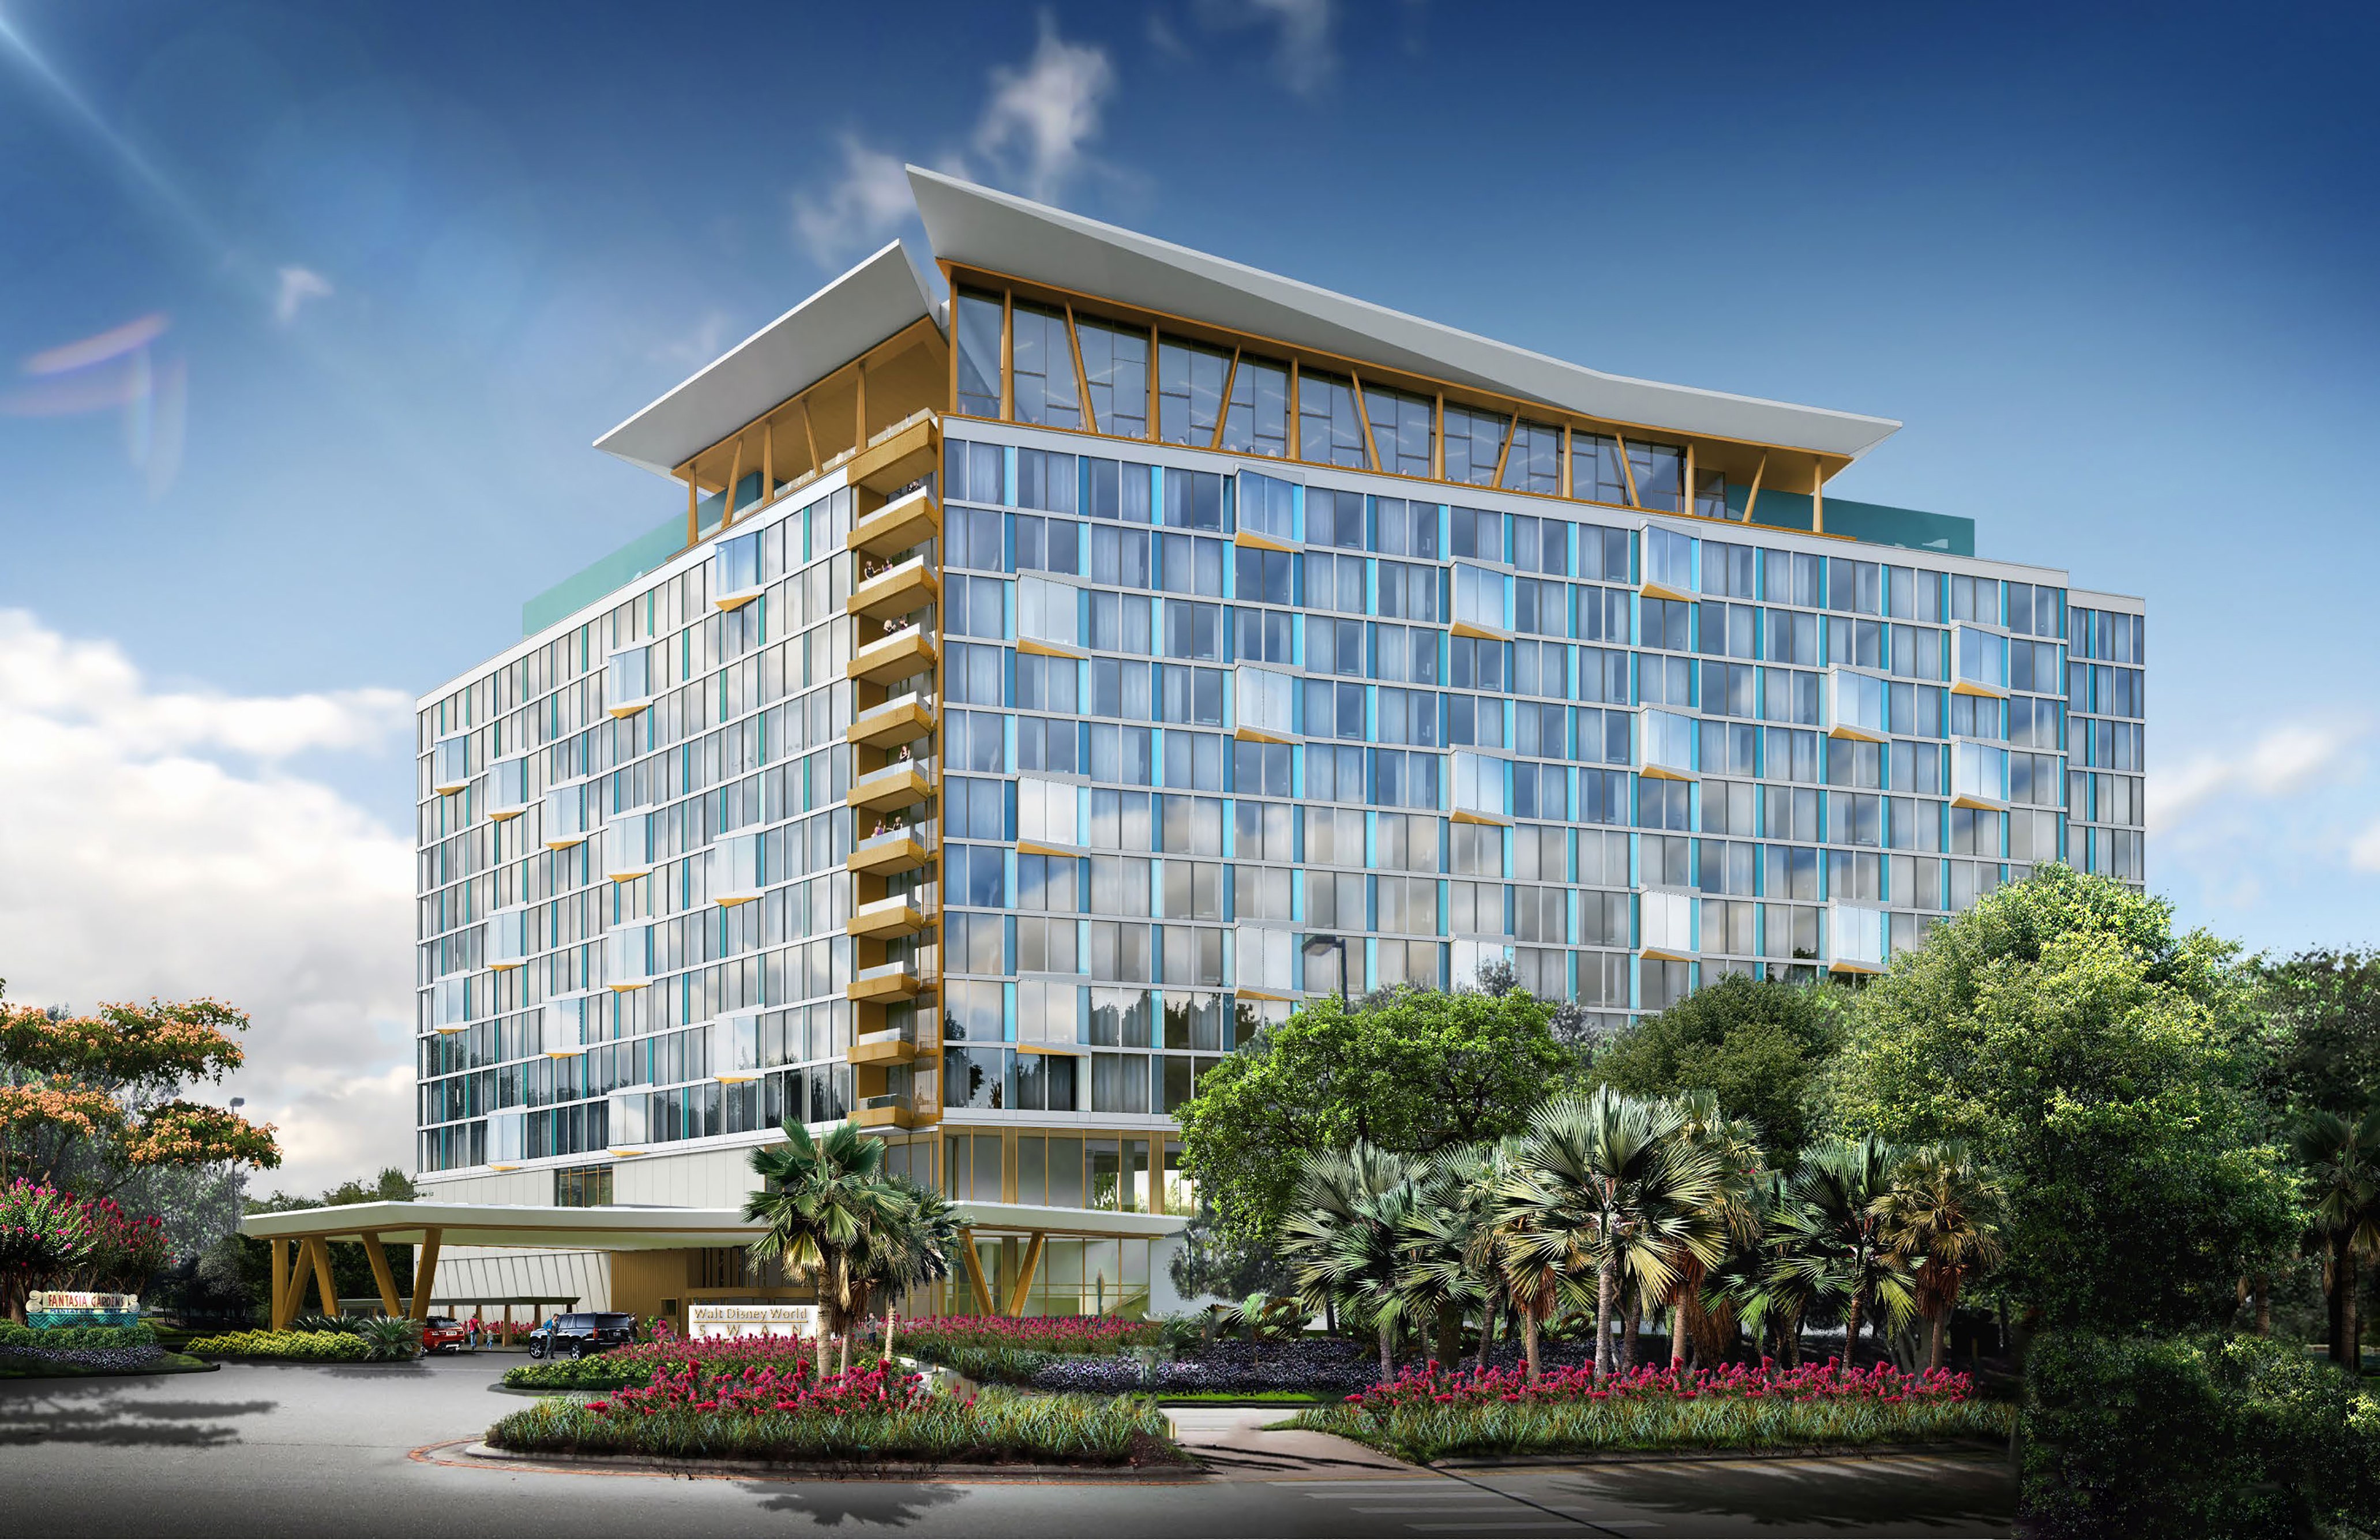 New hotel opening at Disney World now with reservations